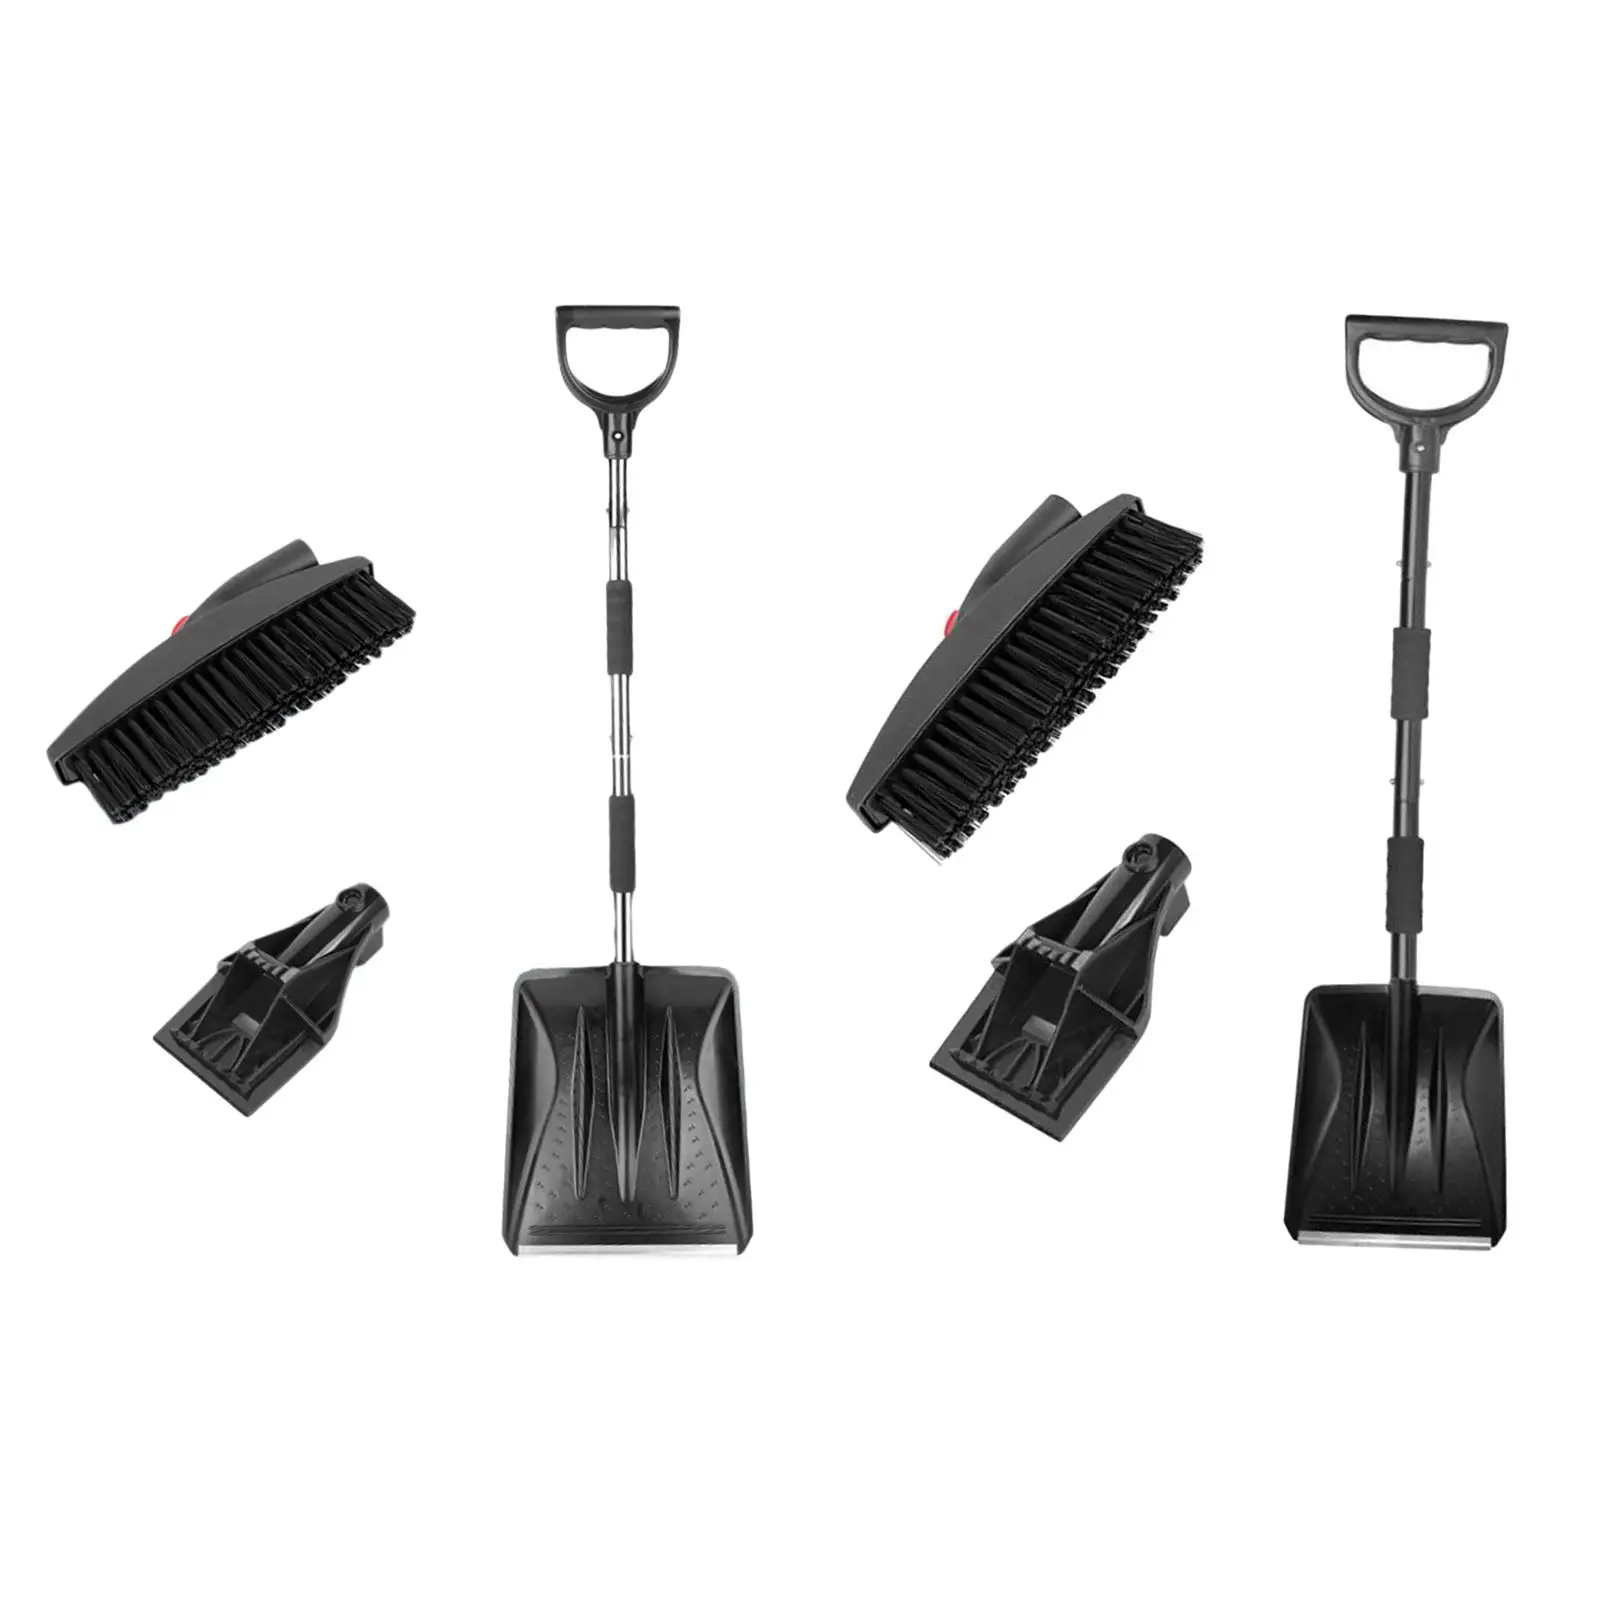 Snow Brush Scraper Snow Shovel for Car Snow Removal Tools for Vehicles Car